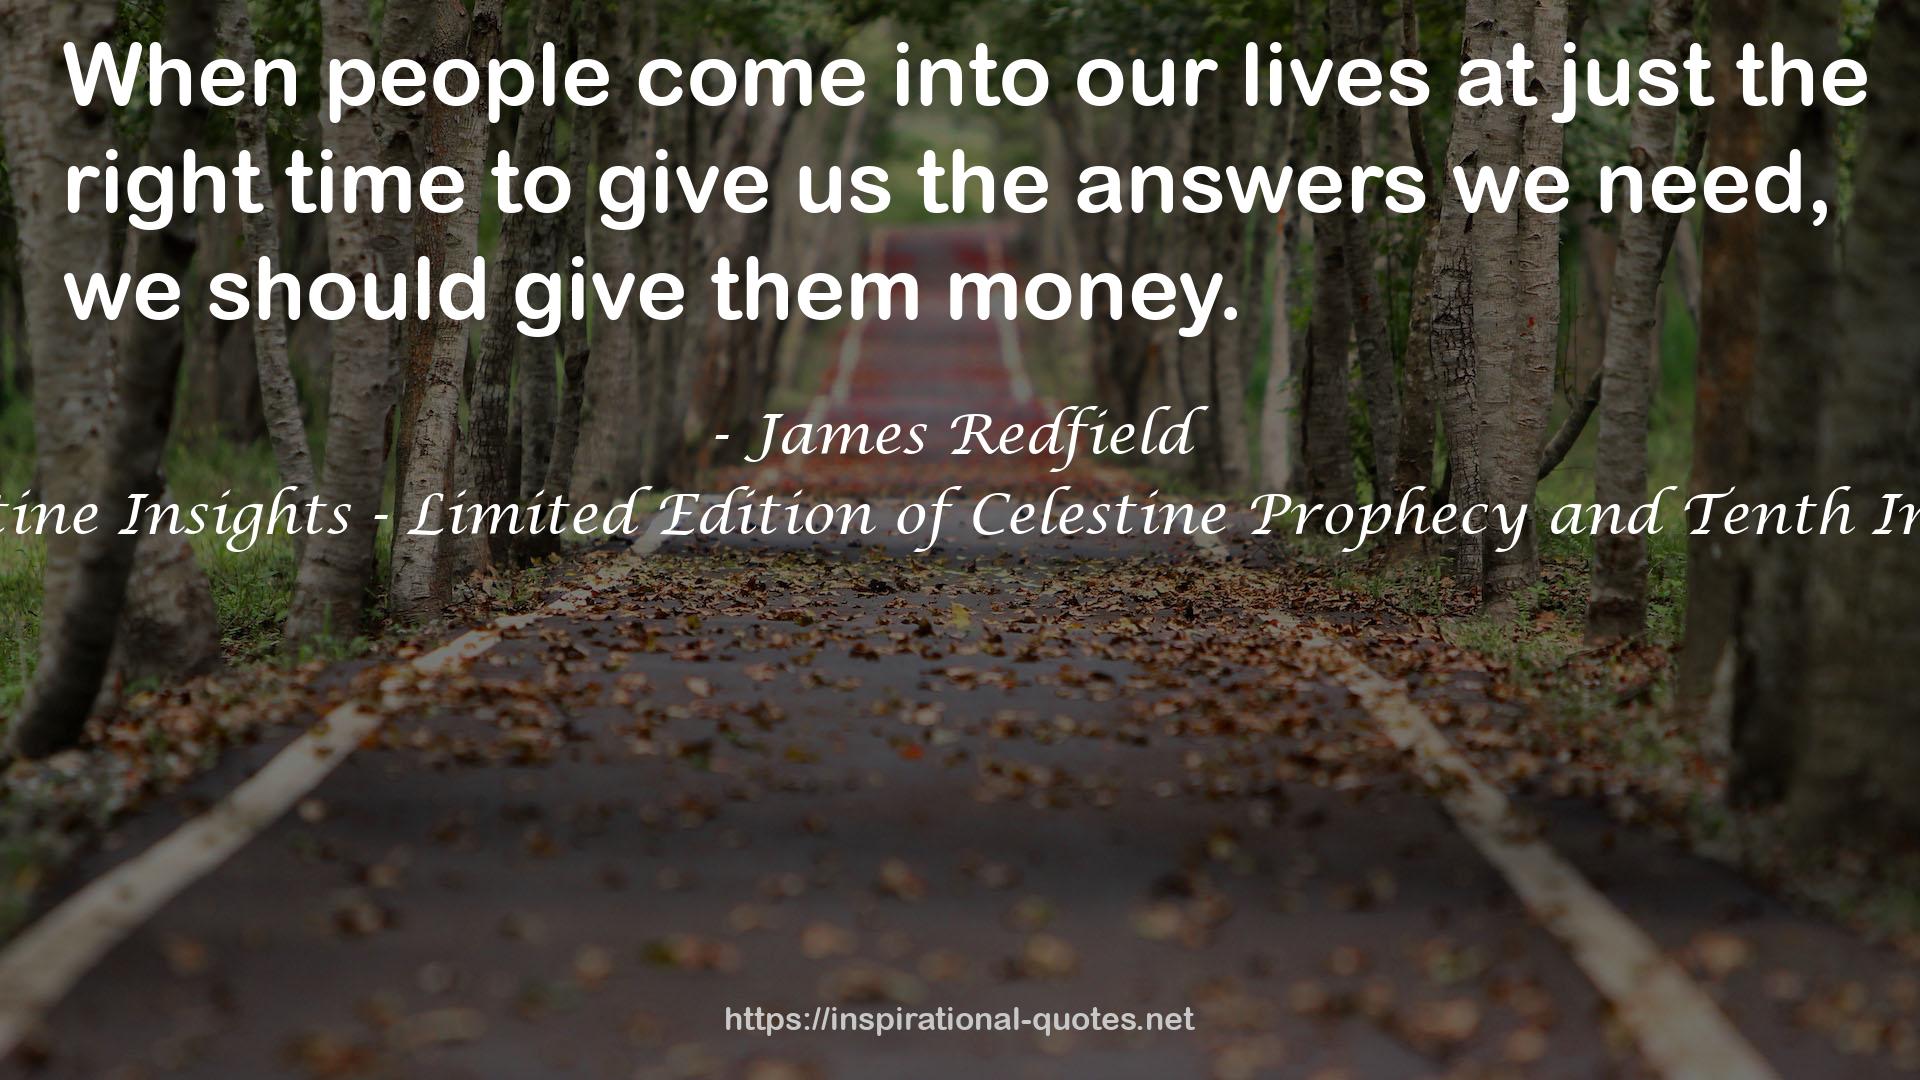 Celestine Insights - Limited Edition of Celestine Prophecy and Tenth Insight QUOTES